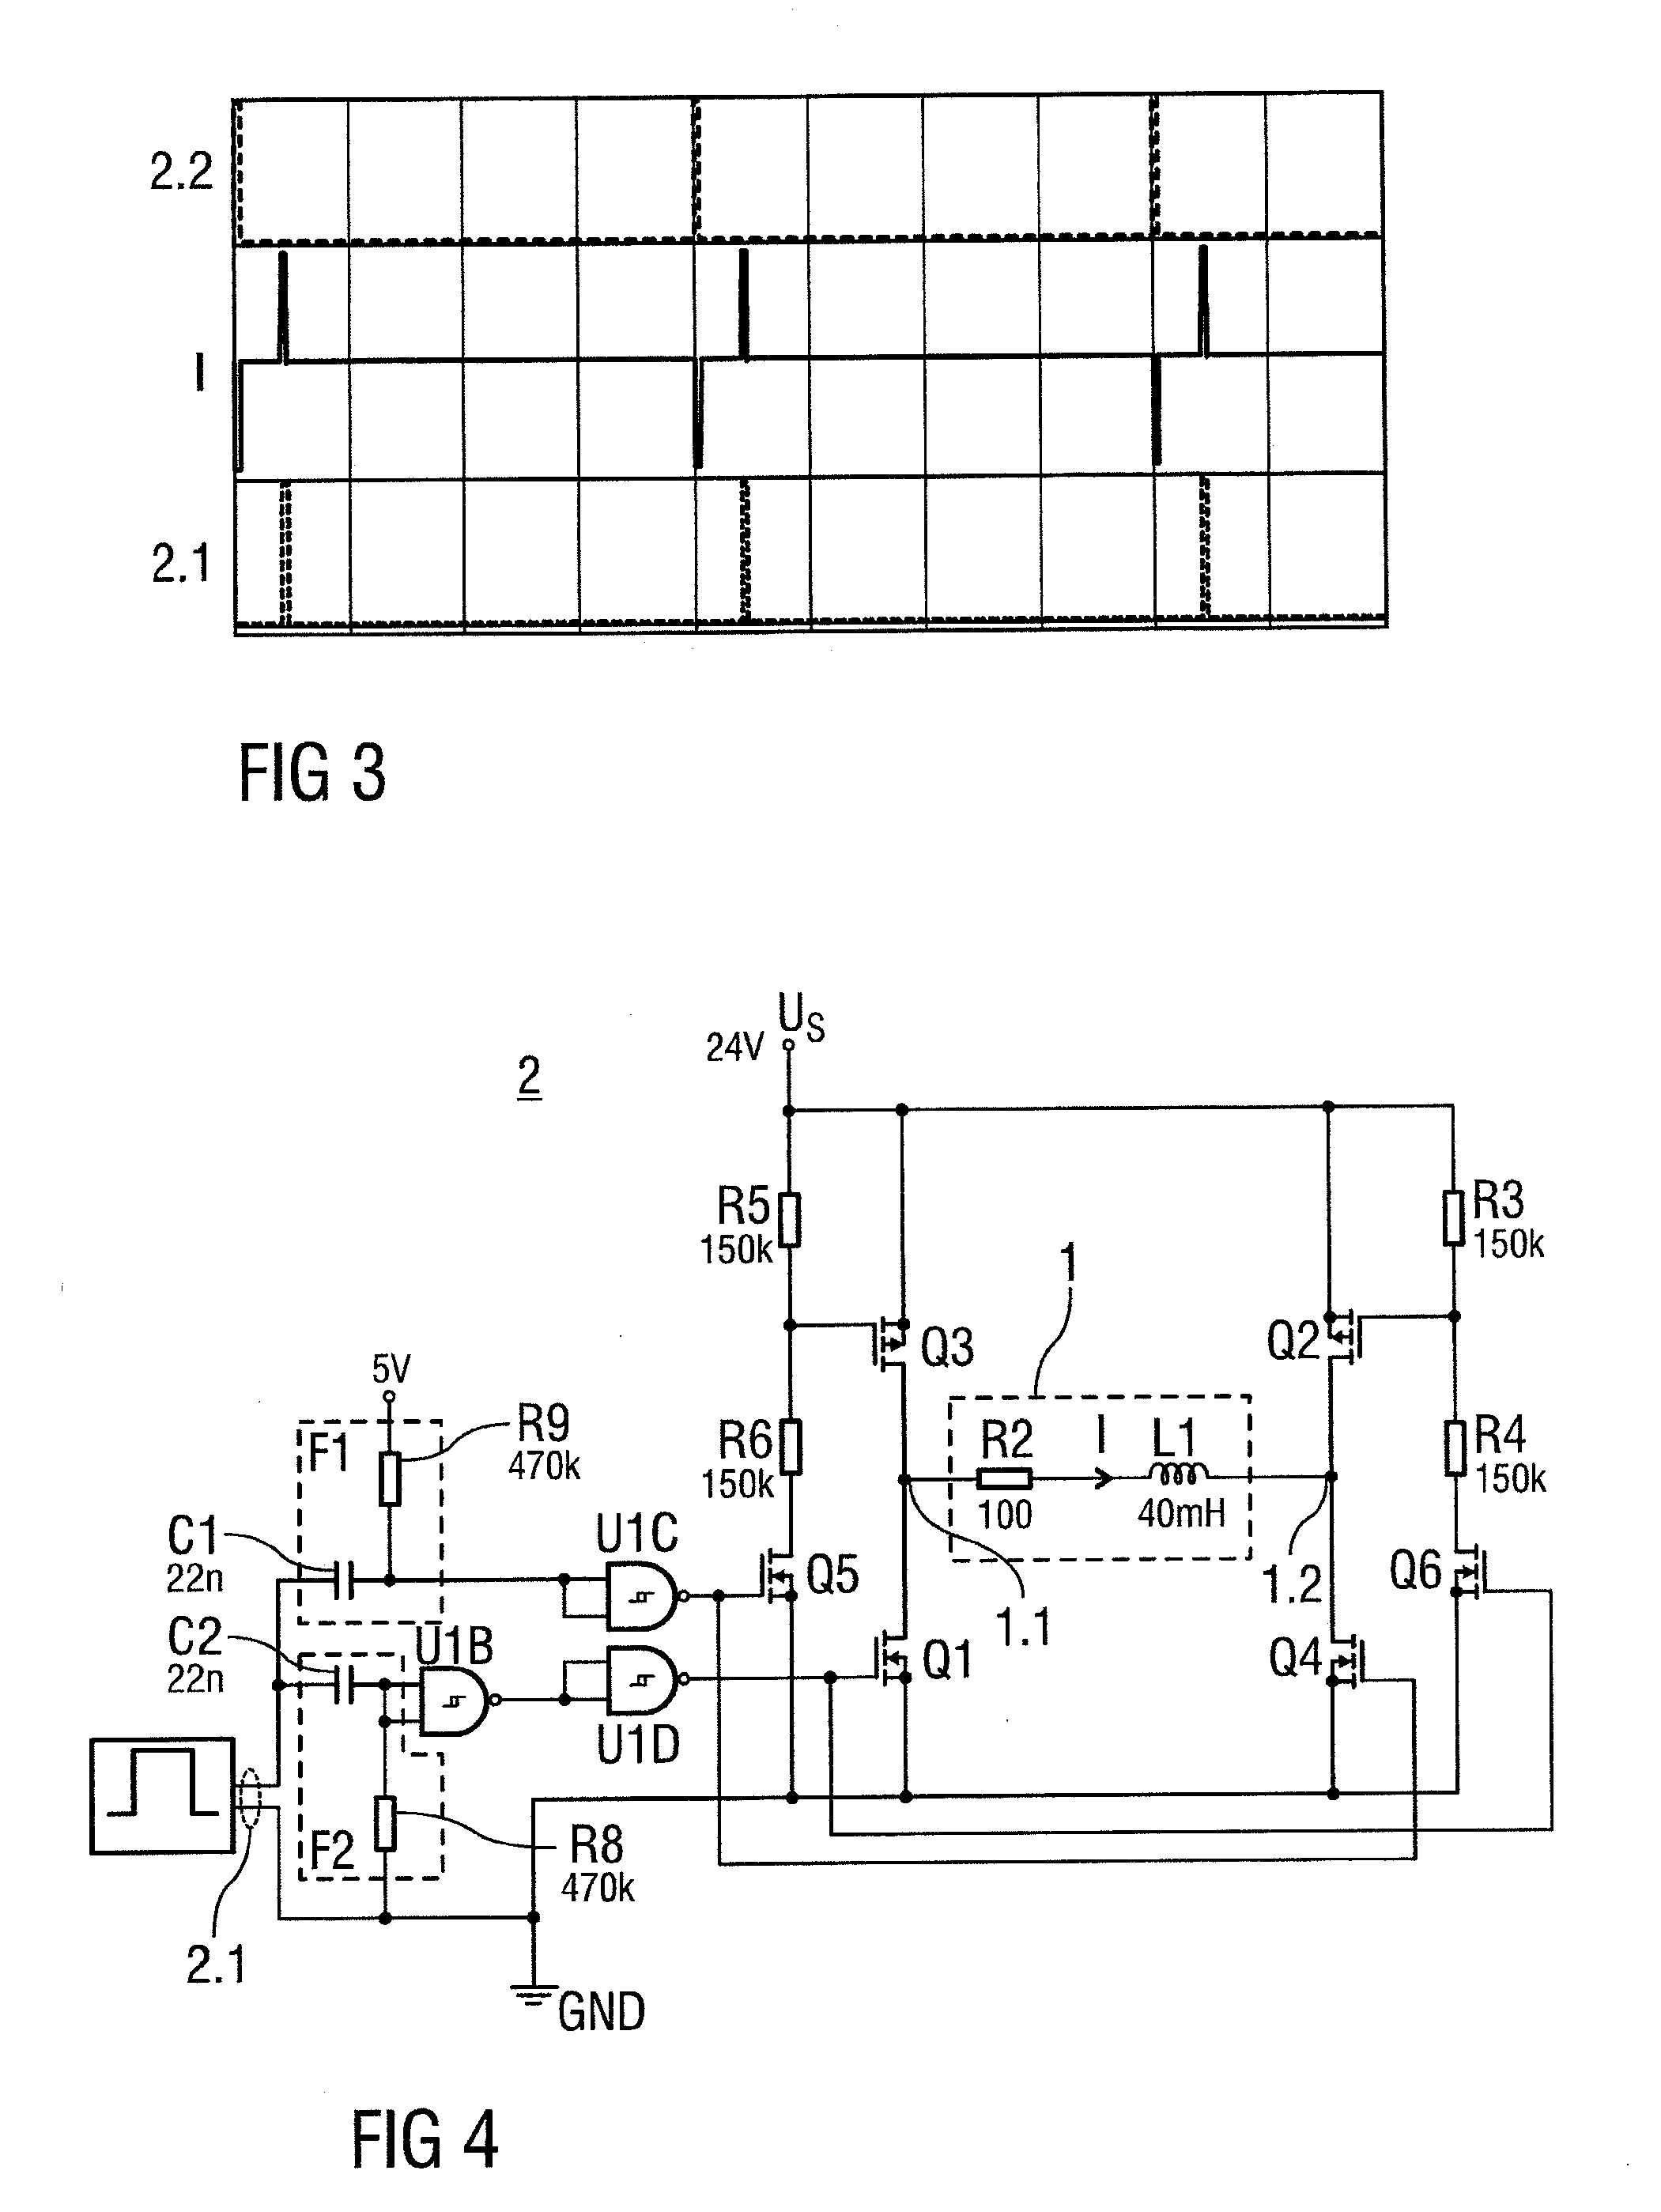 Electronic adapter for controlling a bistable valve